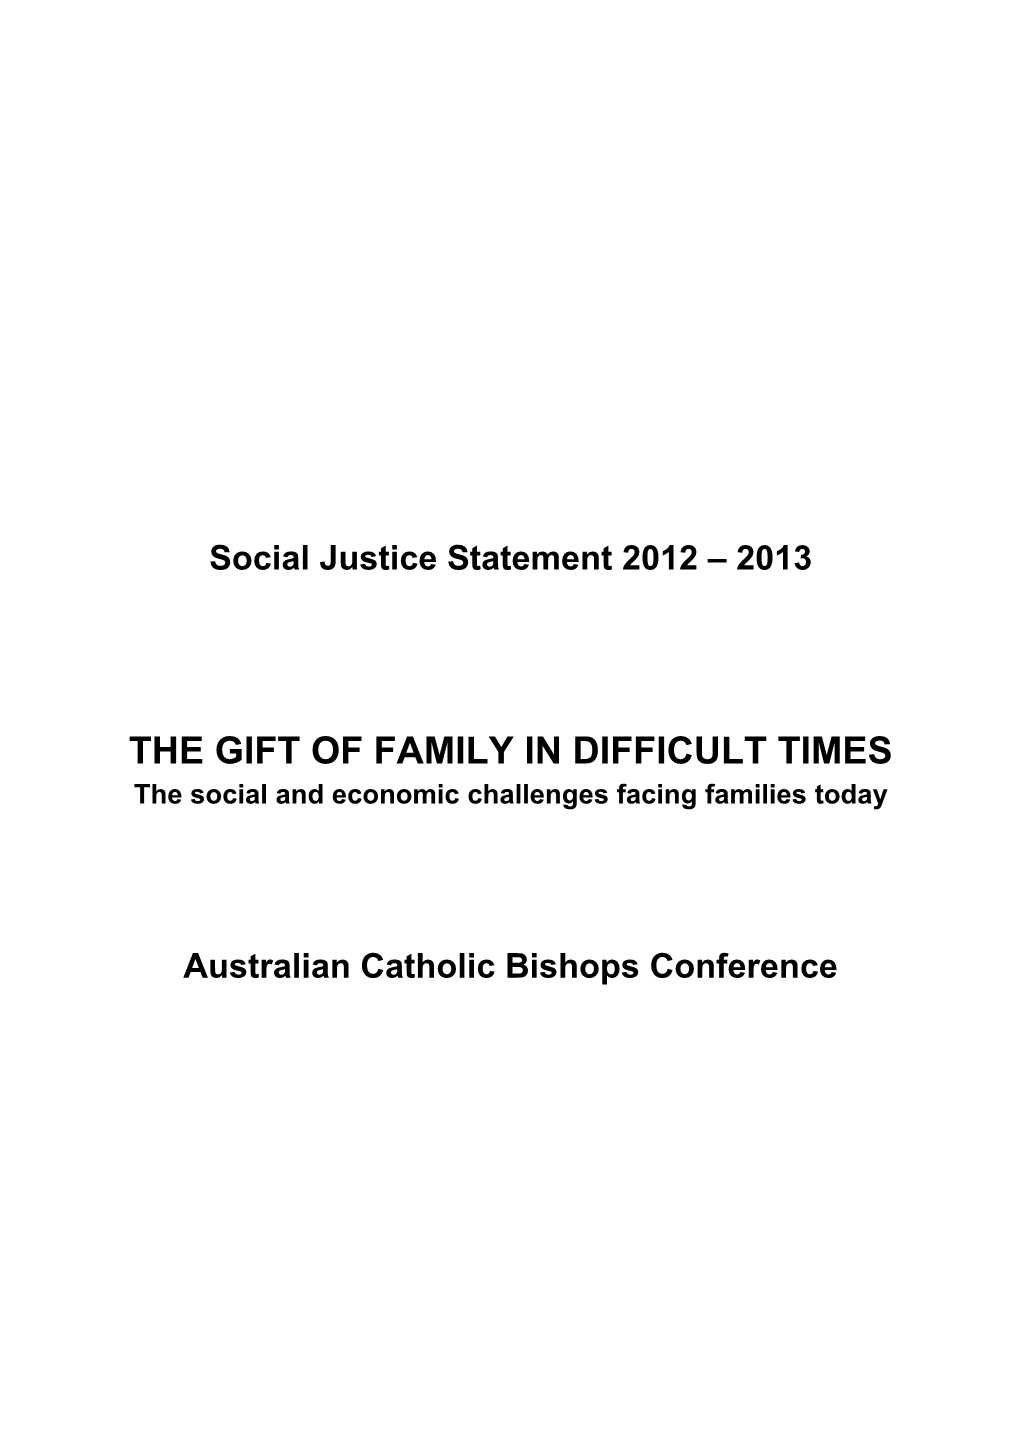 Social Justice Statement 2012 2013 the Gift of Family in Difficult Times